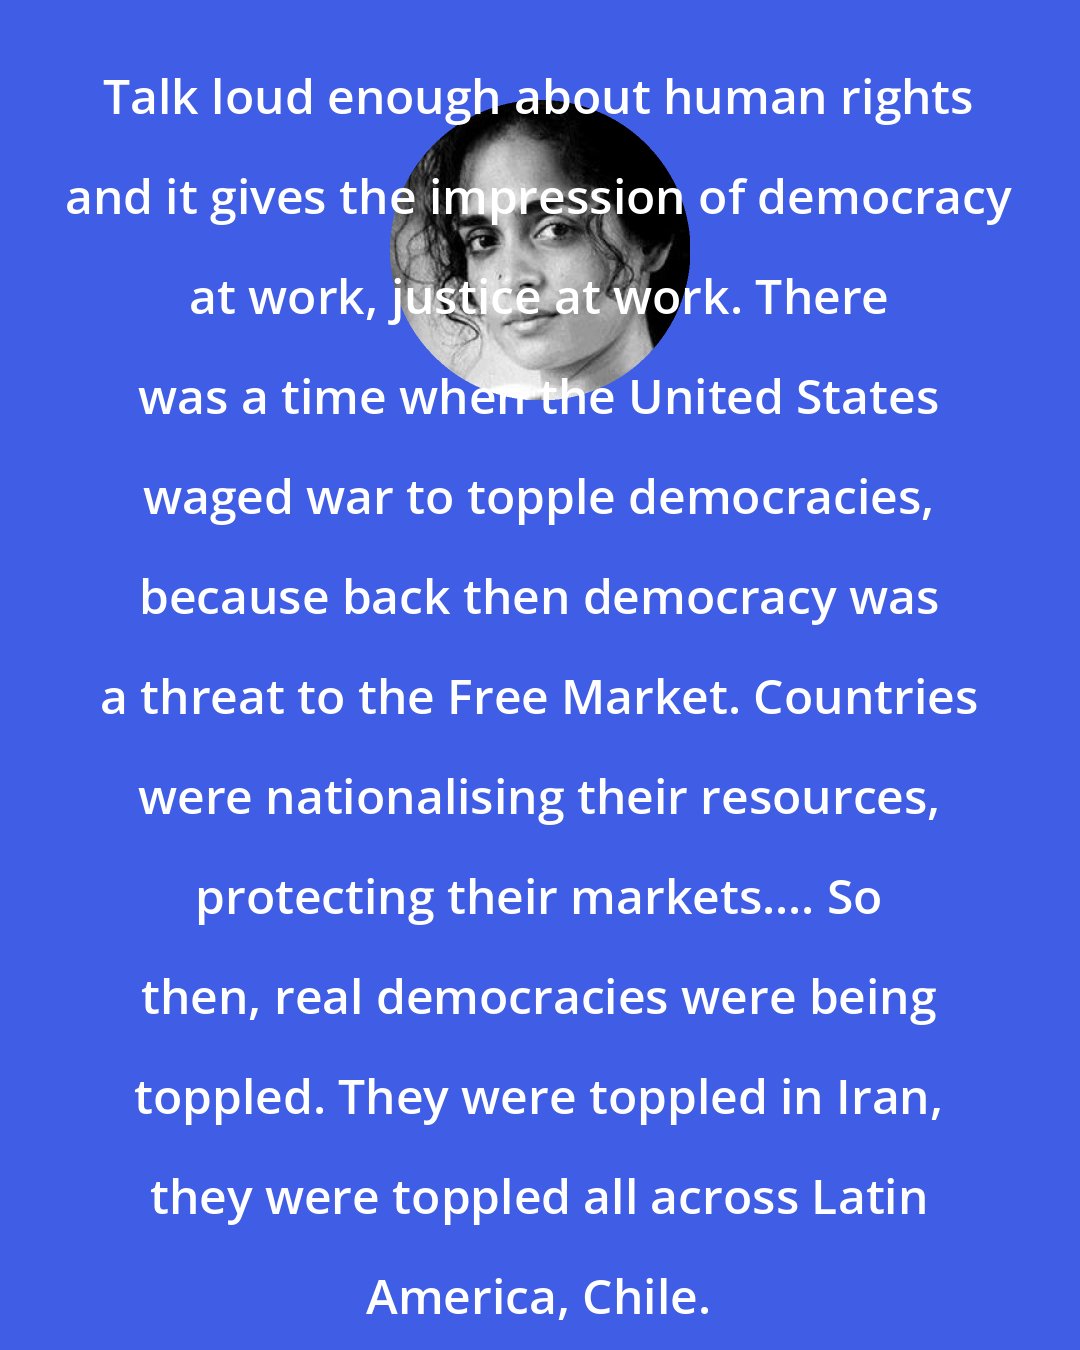 Arundhati Roy: Talk loud enough about human rights and it gives the impression of democracy at work, justice at work. There was a time when the United States waged war to topple democracies, because back then democracy was a threat to the Free Market. Countries were nationalising their resources, protecting their markets.... So then, real democracies were being toppled. They were toppled in Iran, they were toppled all across Latin America, Chile.